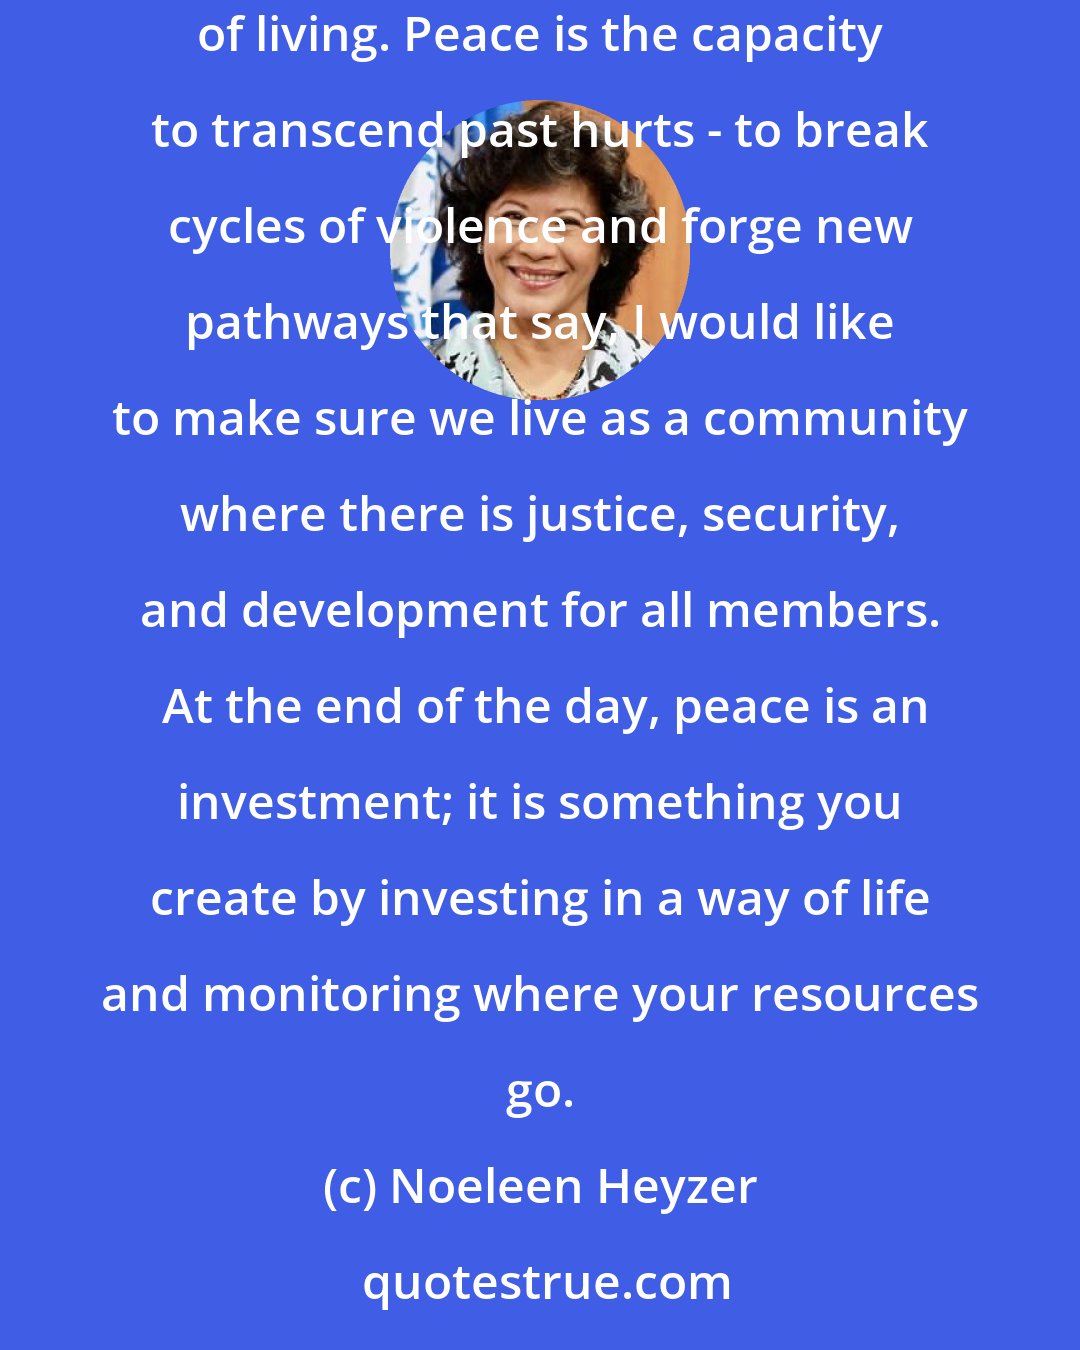 Noeleen Heyzer: Peace is the absence of war, but beyond that peace is a commodity unlike any other. Peace is security. Peace is a mindset. Peace is a way of living. Peace is the capacity to transcend past hurts - to break cycles of violence and forge new pathways that say, I would like to make sure we live as a community where there is justice, security, and development for all members.  At the end of the day, peace is an investment; it is something you create by investing in a way of life and monitoring where your resources go.